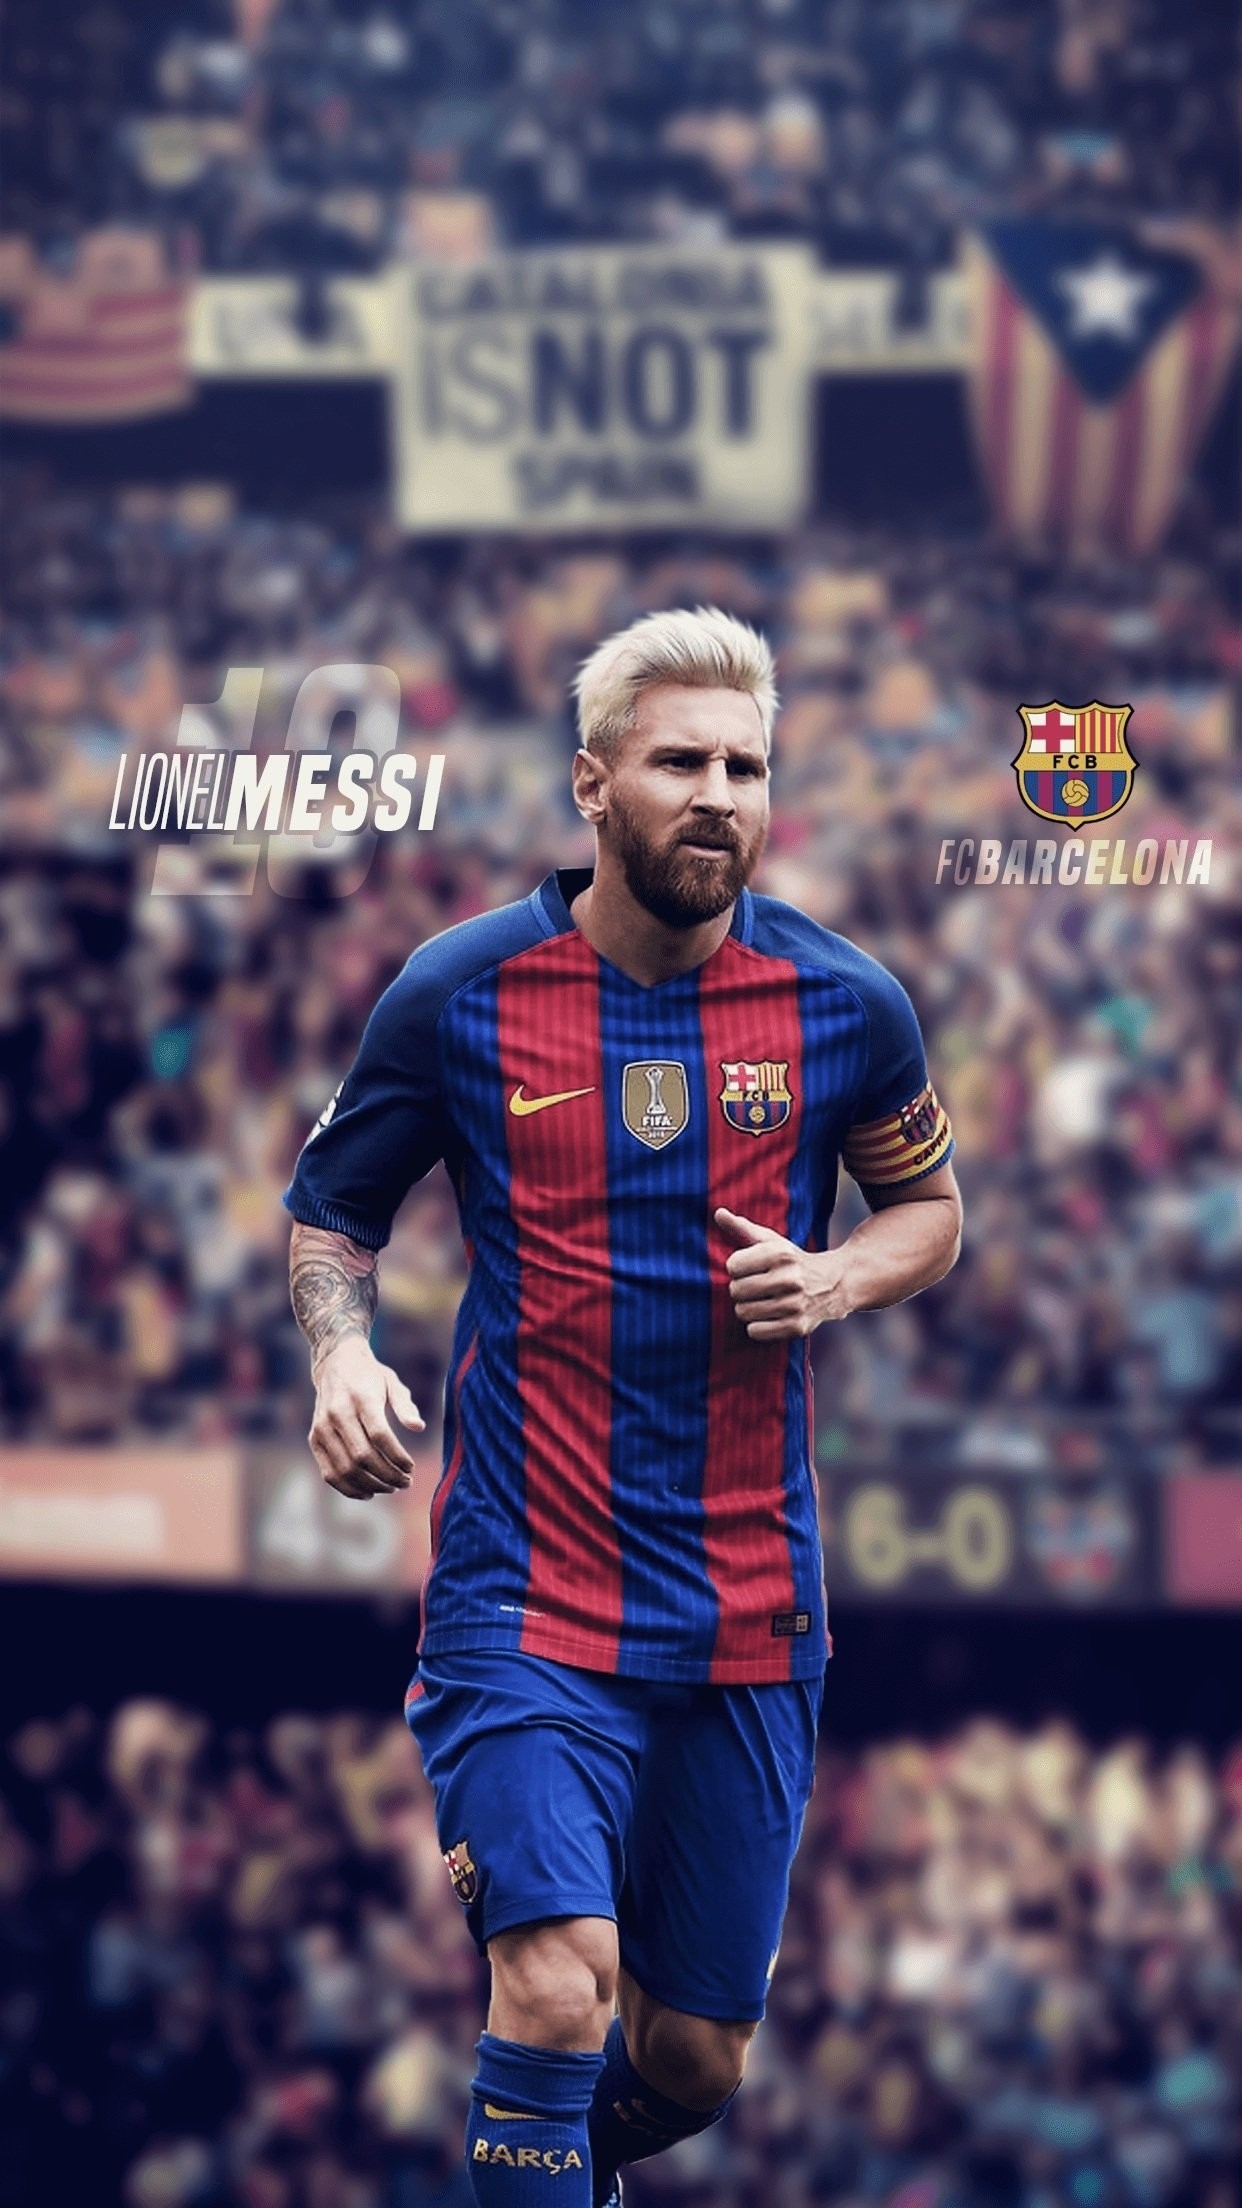 Messi Background 2018 (87+ pictures)